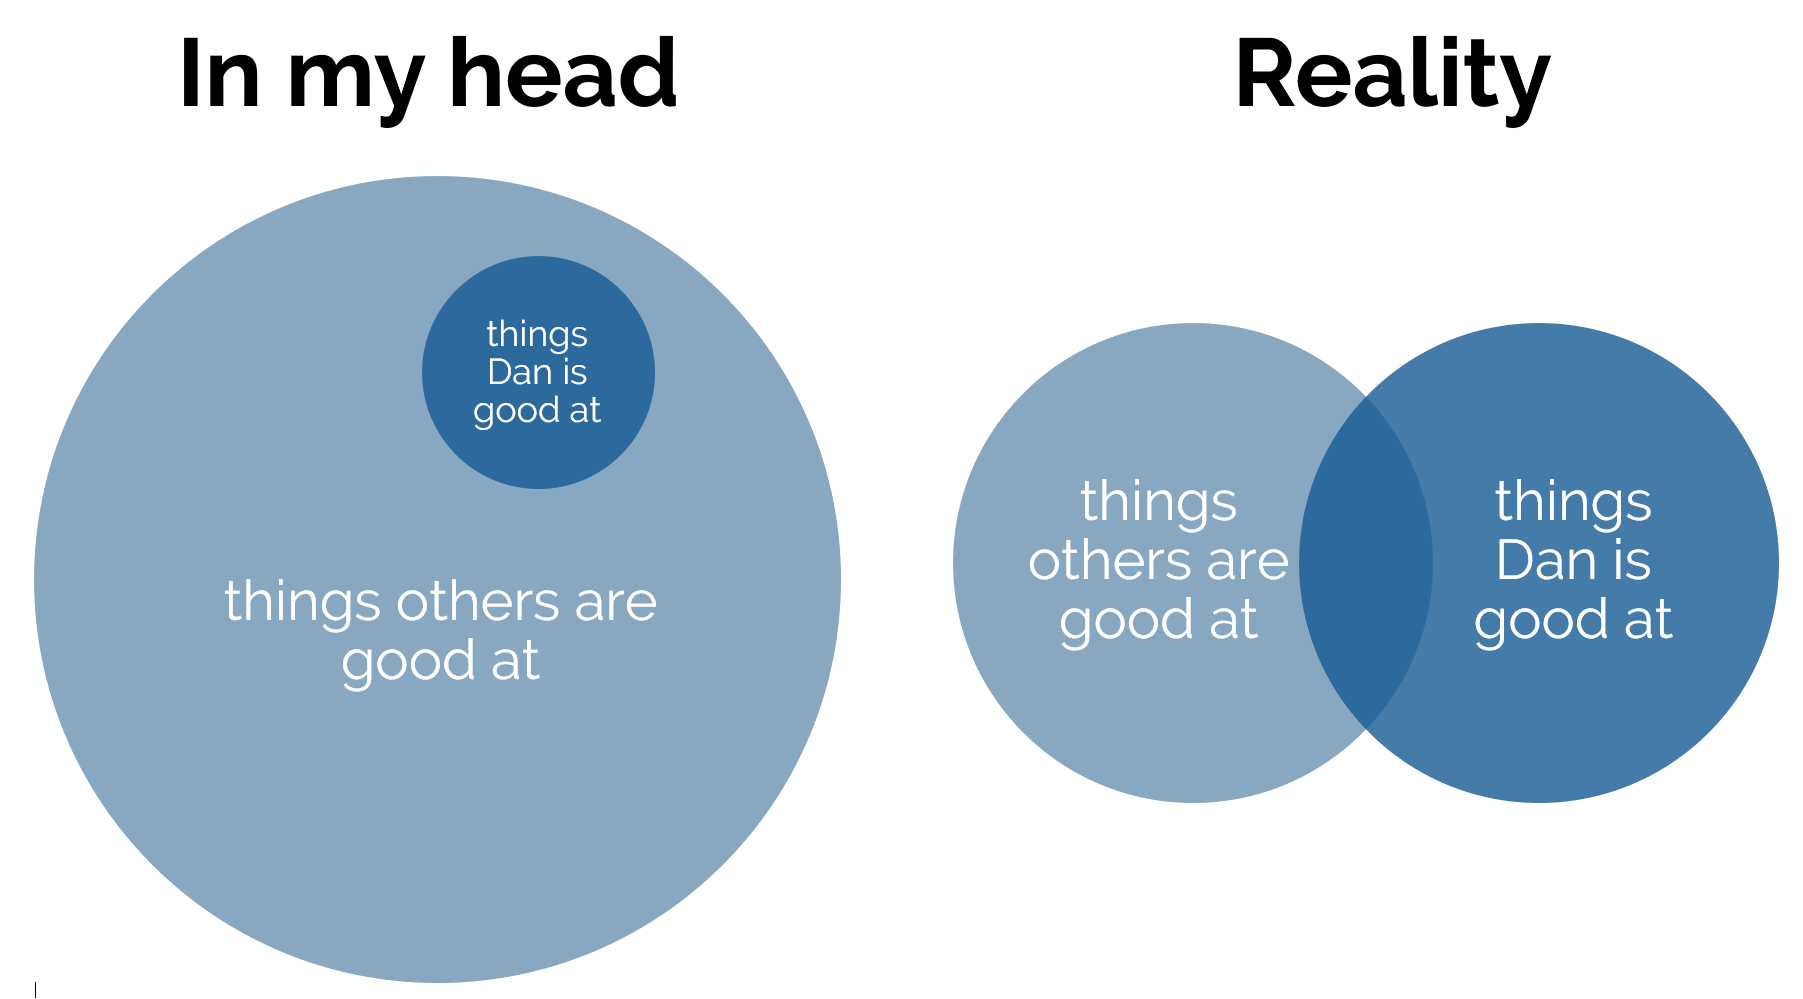 Pair of Venn diagrams. The first, titled "In my head", shows "things Dan is good at" as a subset of "things others are good at". The second, titled "Reality", shows an intersection between "things others are good at" and "things Dan is good at" but plenty of unshared space in each.